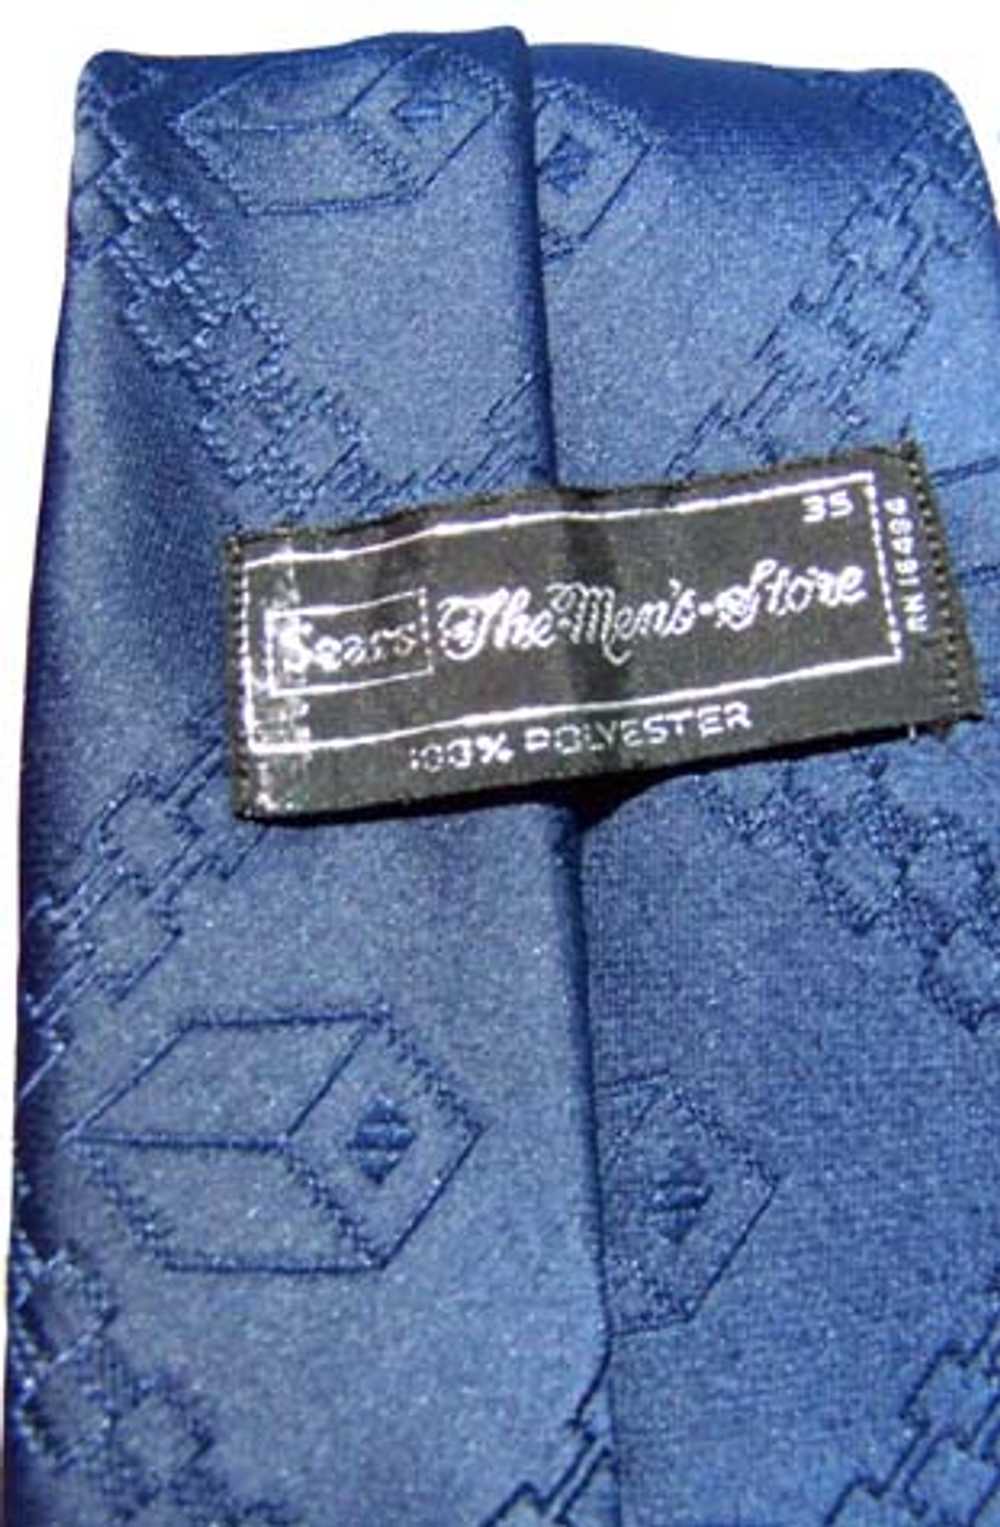 Sears mathematical mens' tie - image 4